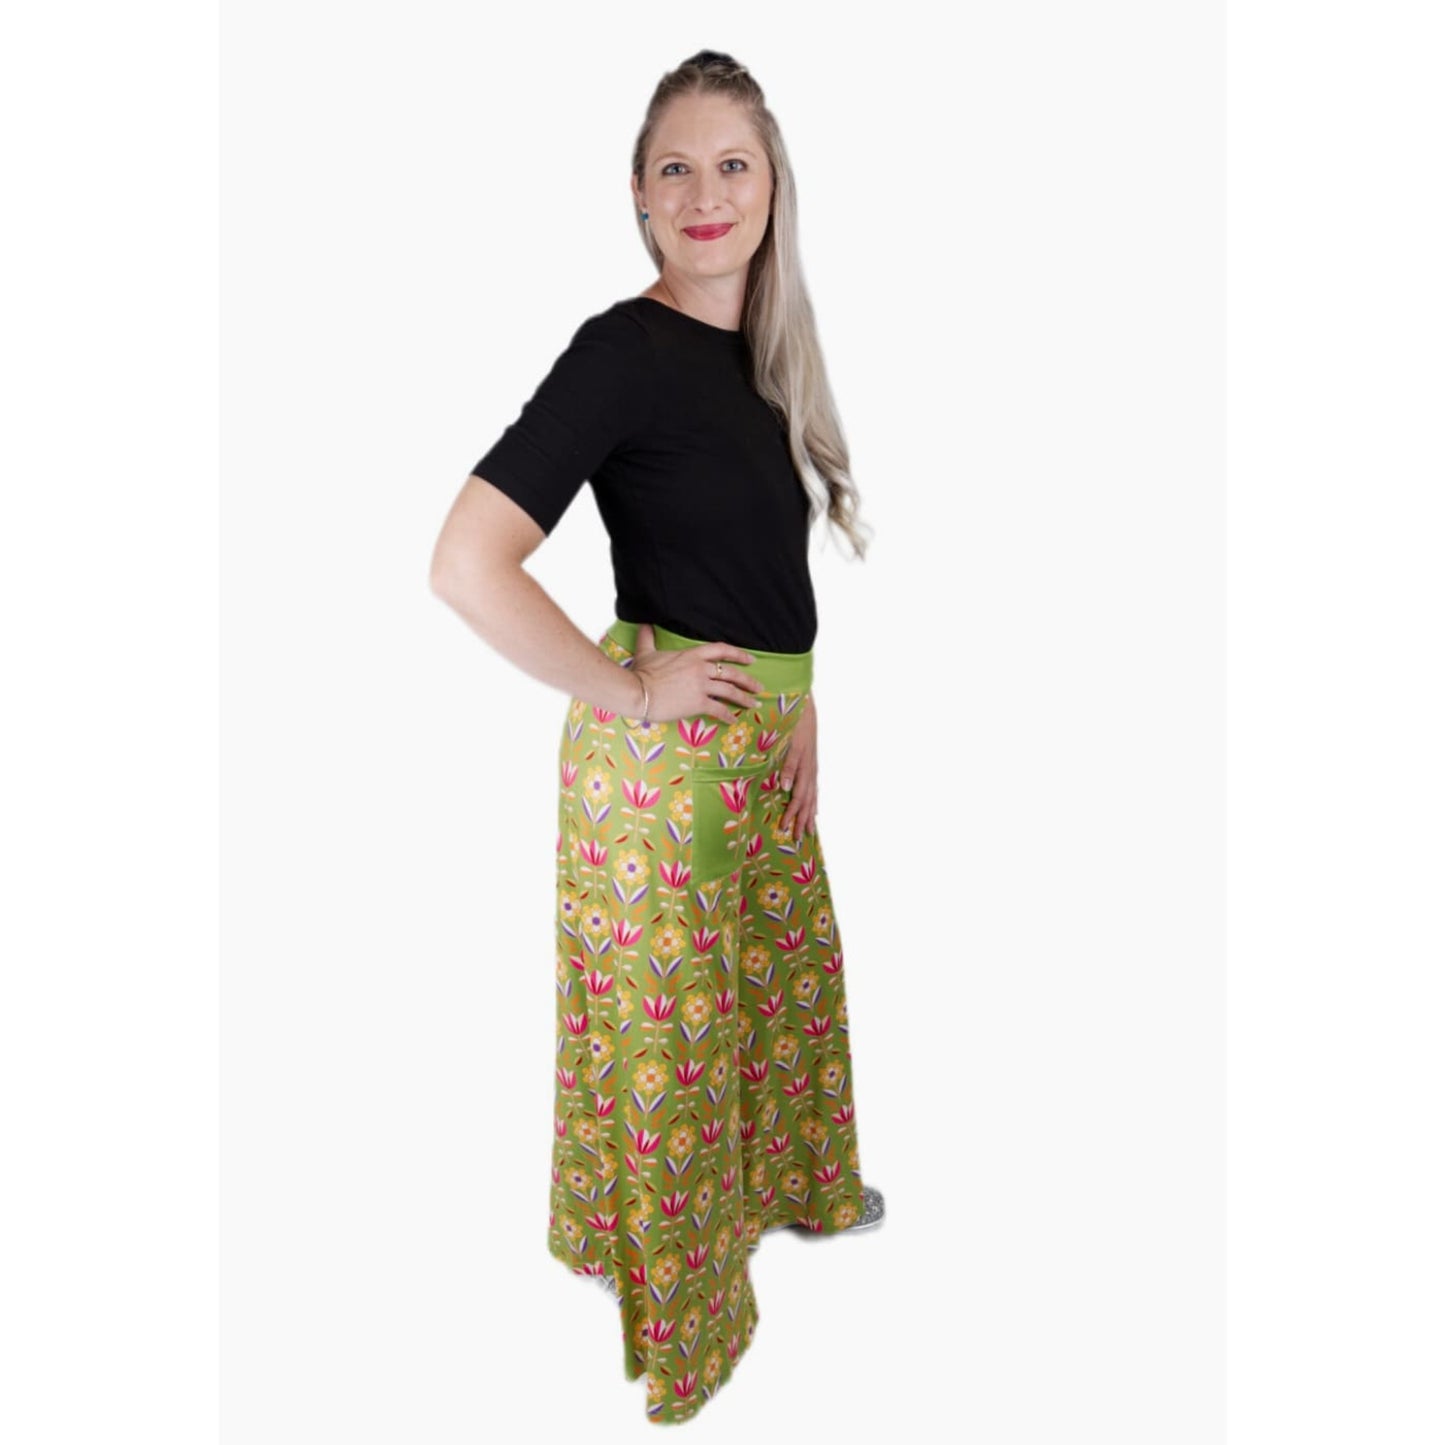 Retro Flower Wide Leg Pants by RainbowsAndFairies.com.au (70s Wallpaper - Psychedelic - Tulip - Pants With Pockets - Vintage Inspired - Flares - Floral) - SKU: CL_WIDEL_RETFL_ORG - Pic-02